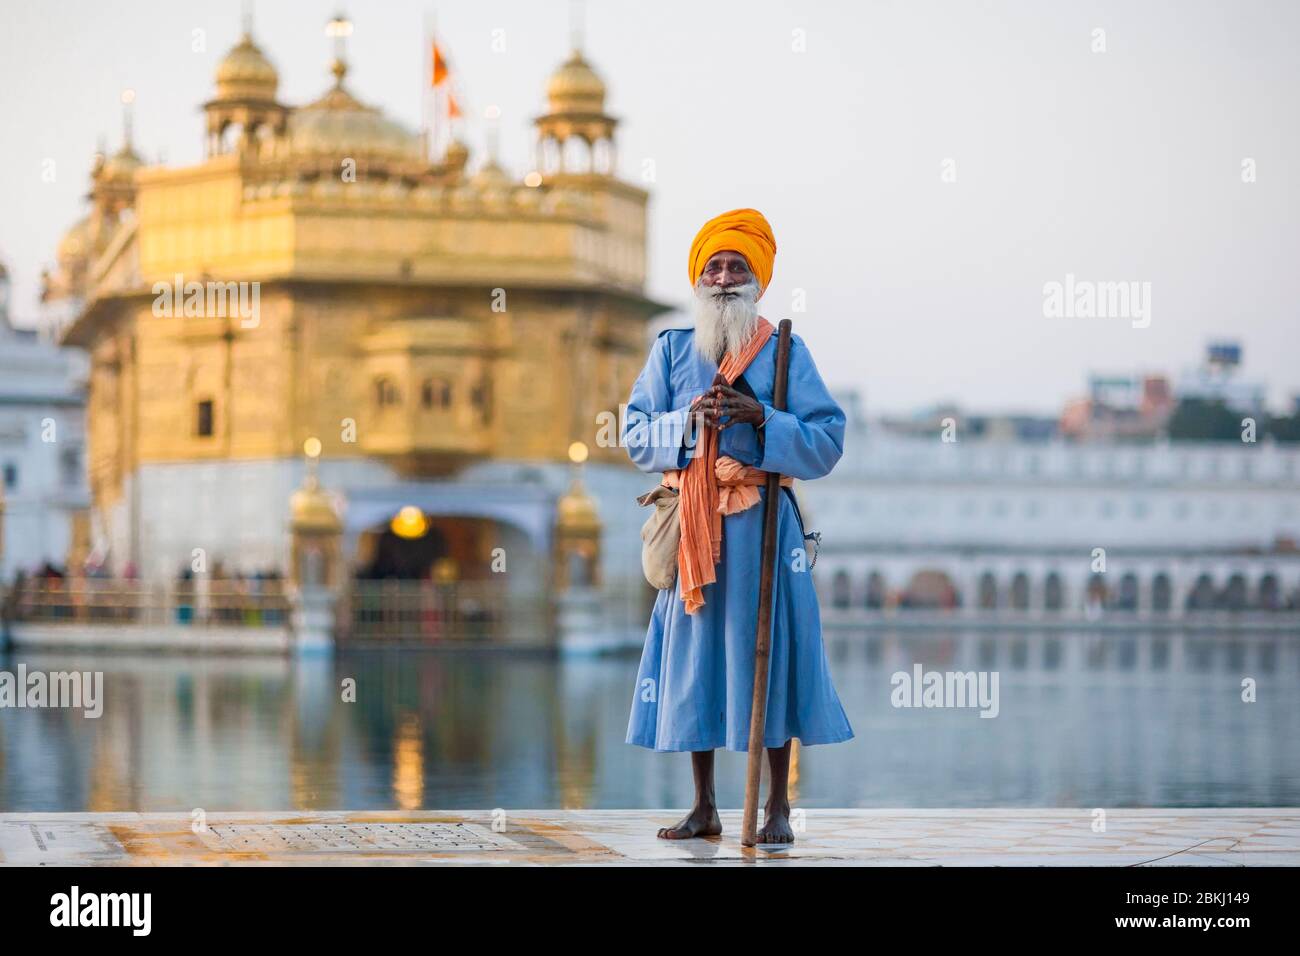 India, Punjab State, Amritsar, Harmandir Sahib, full-length portrait of a Sikh man and Golden Temple in the background, holy place of Sikhism Stock Photo